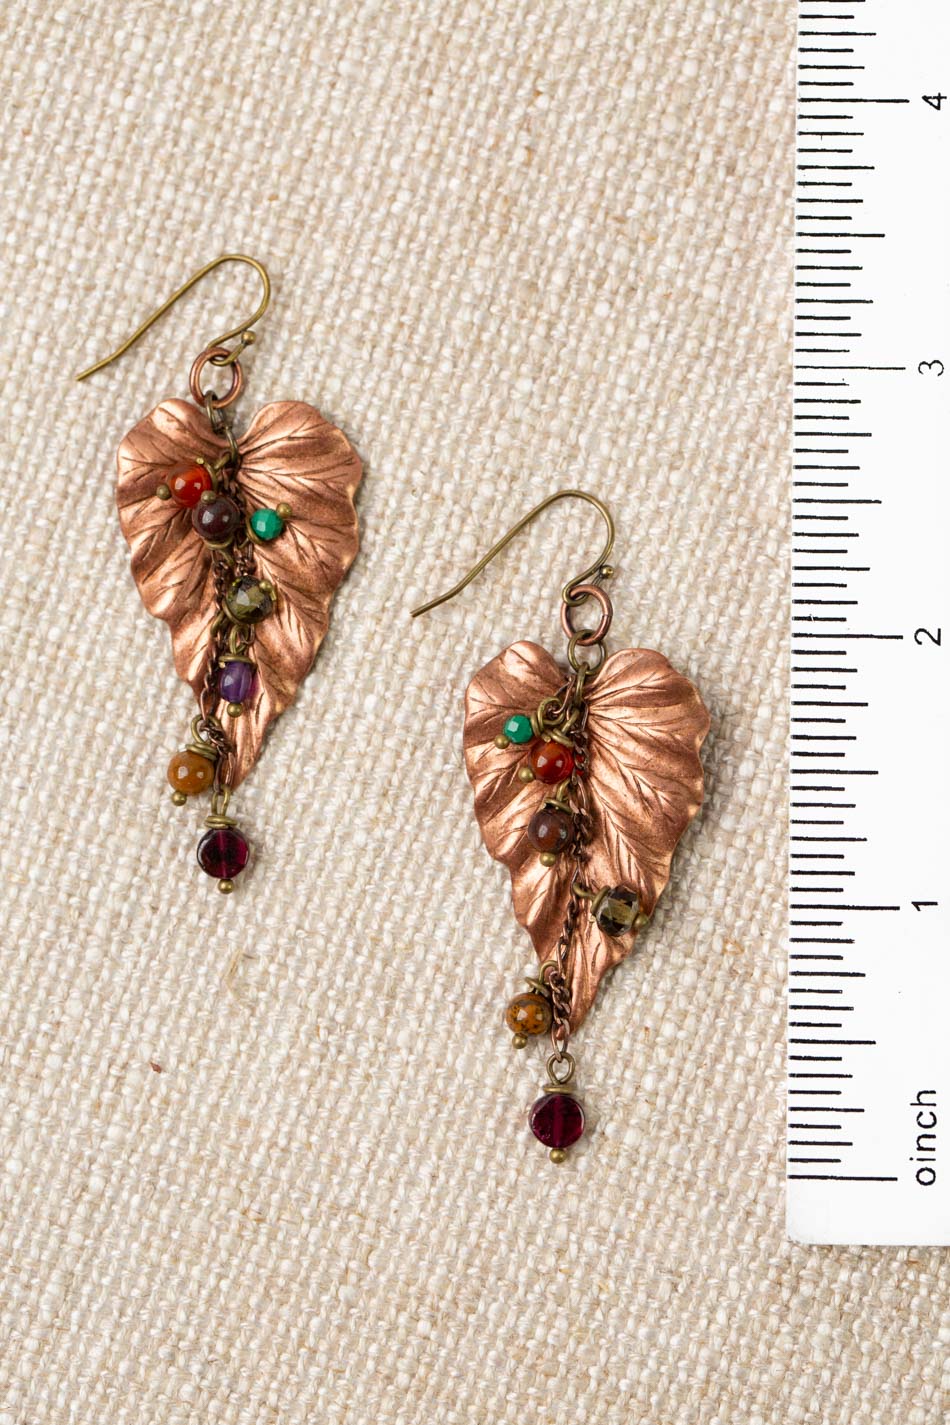 Limited Edition Garnet, Amethyst, Cat's Eye With Antique Brass Leaf Statement Earrings